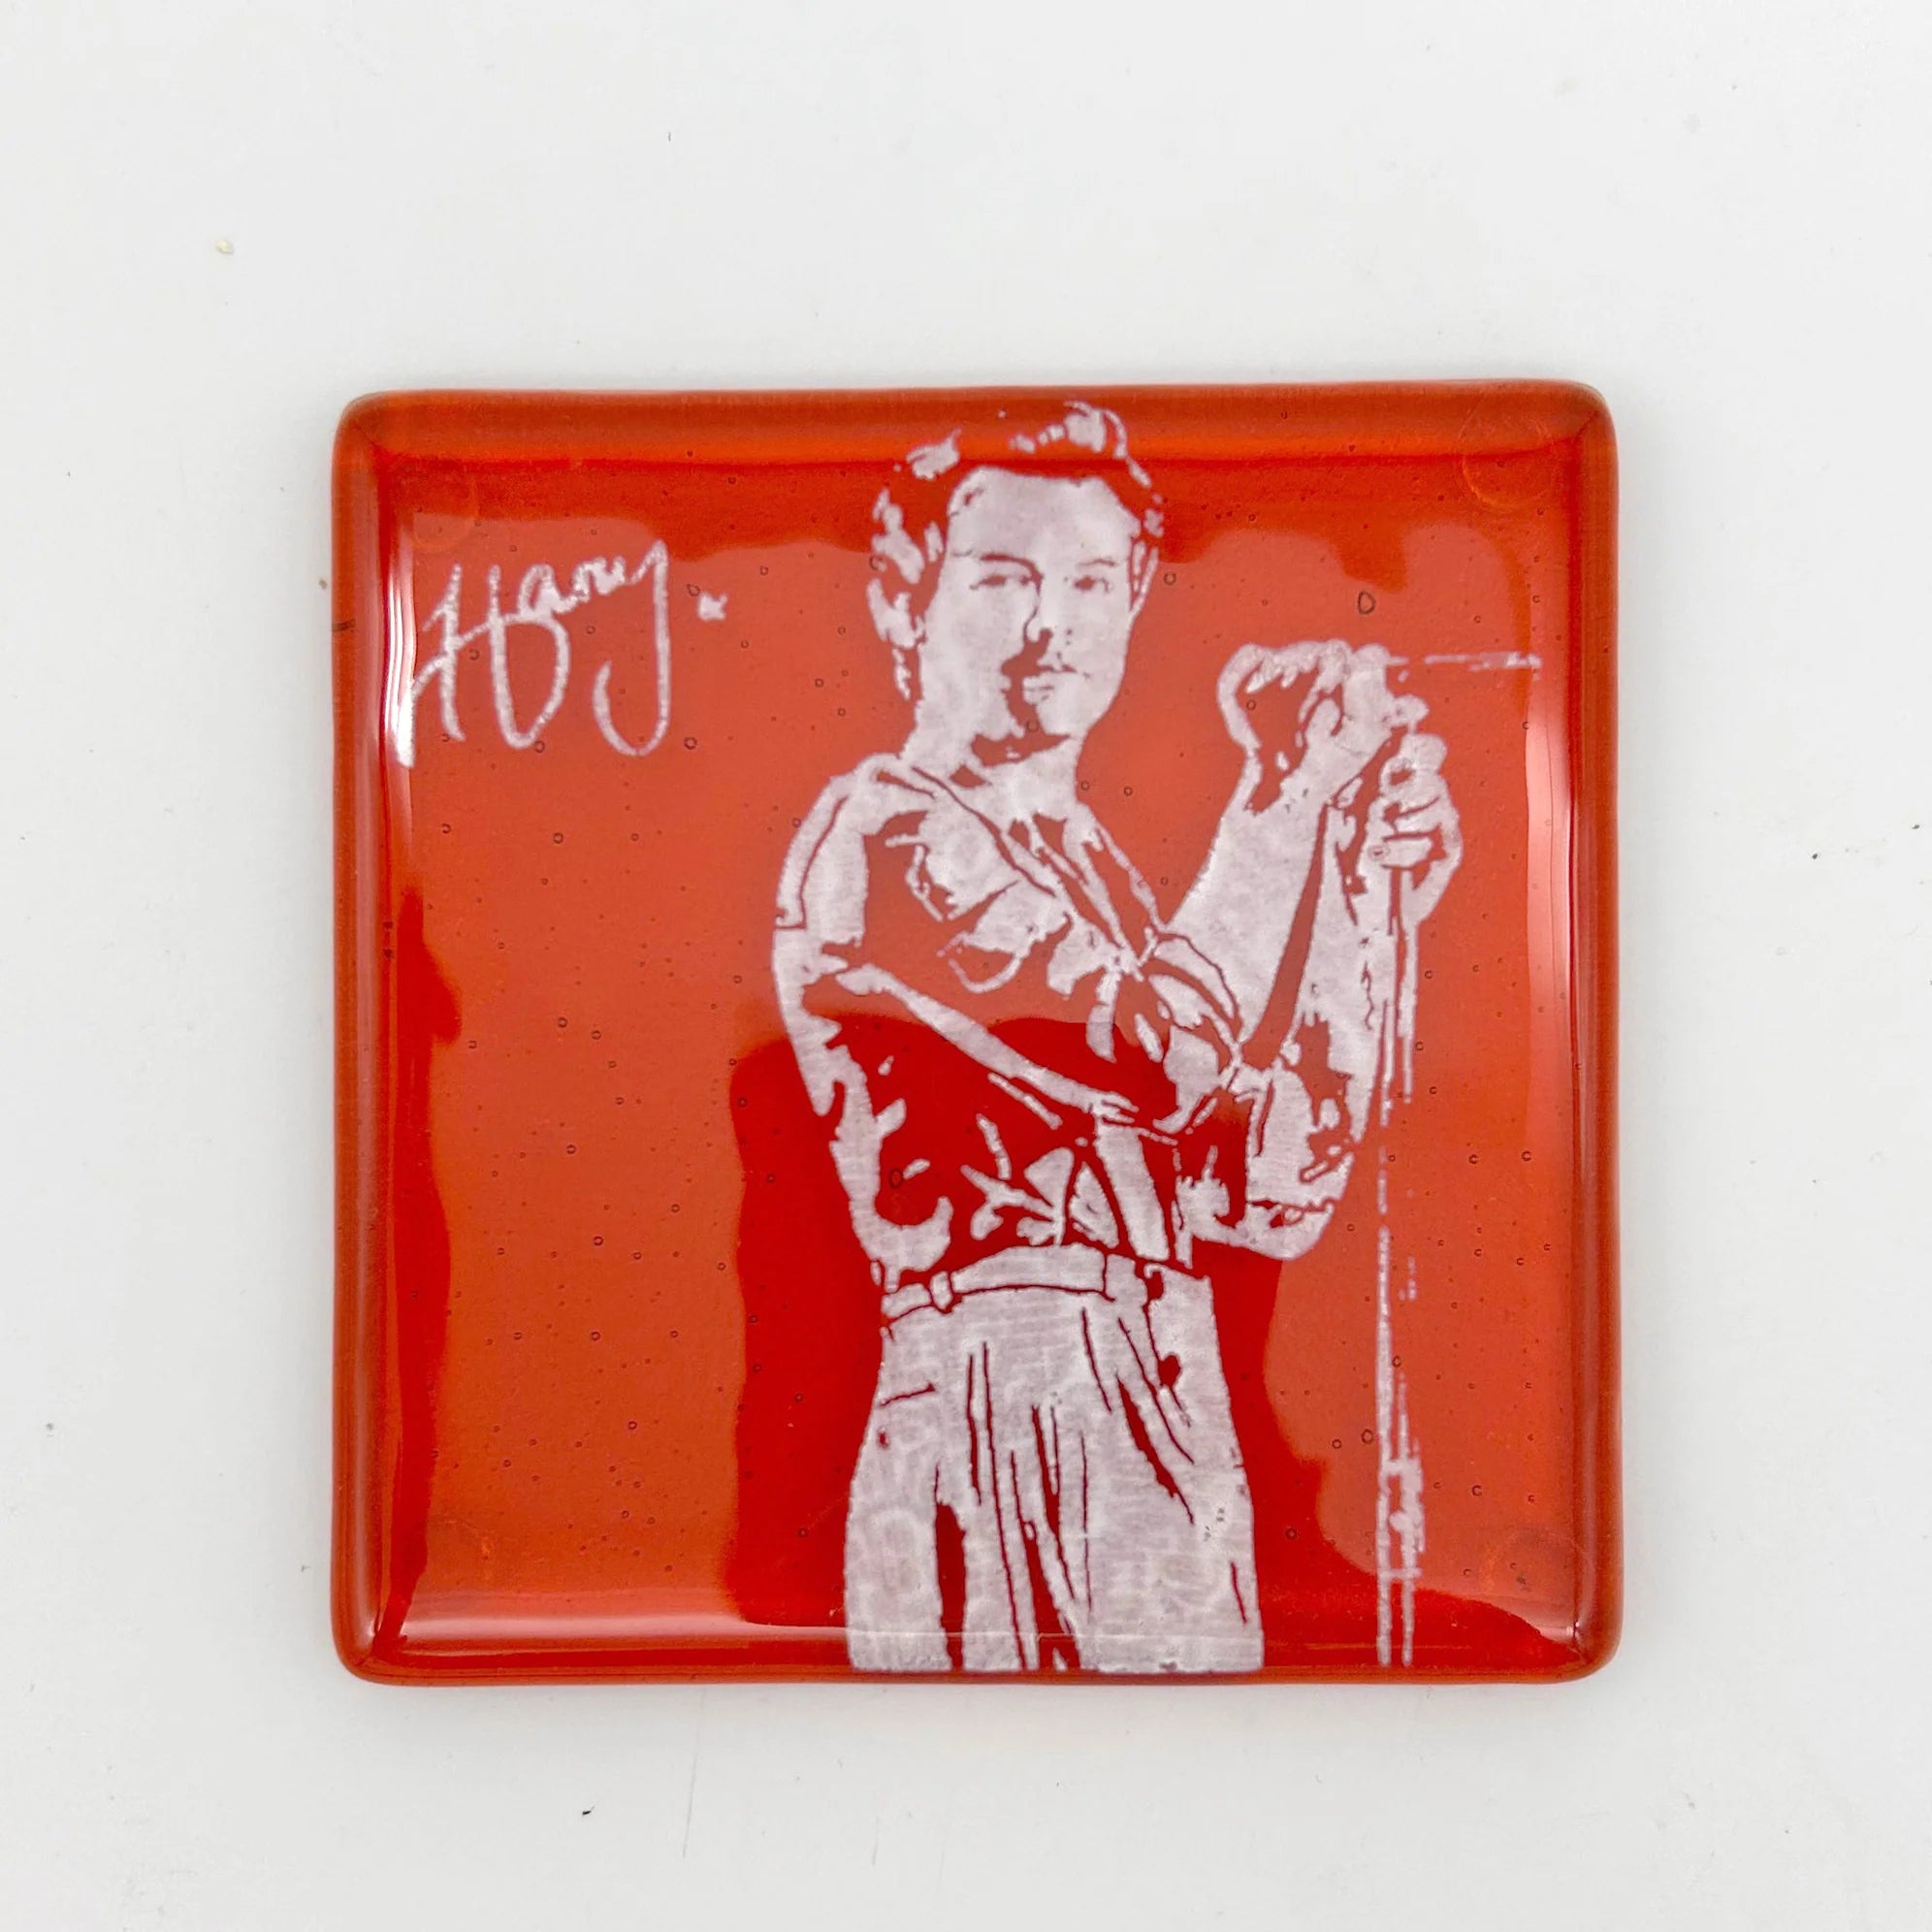 HARRY STYLES FUSED GLASS COASTER